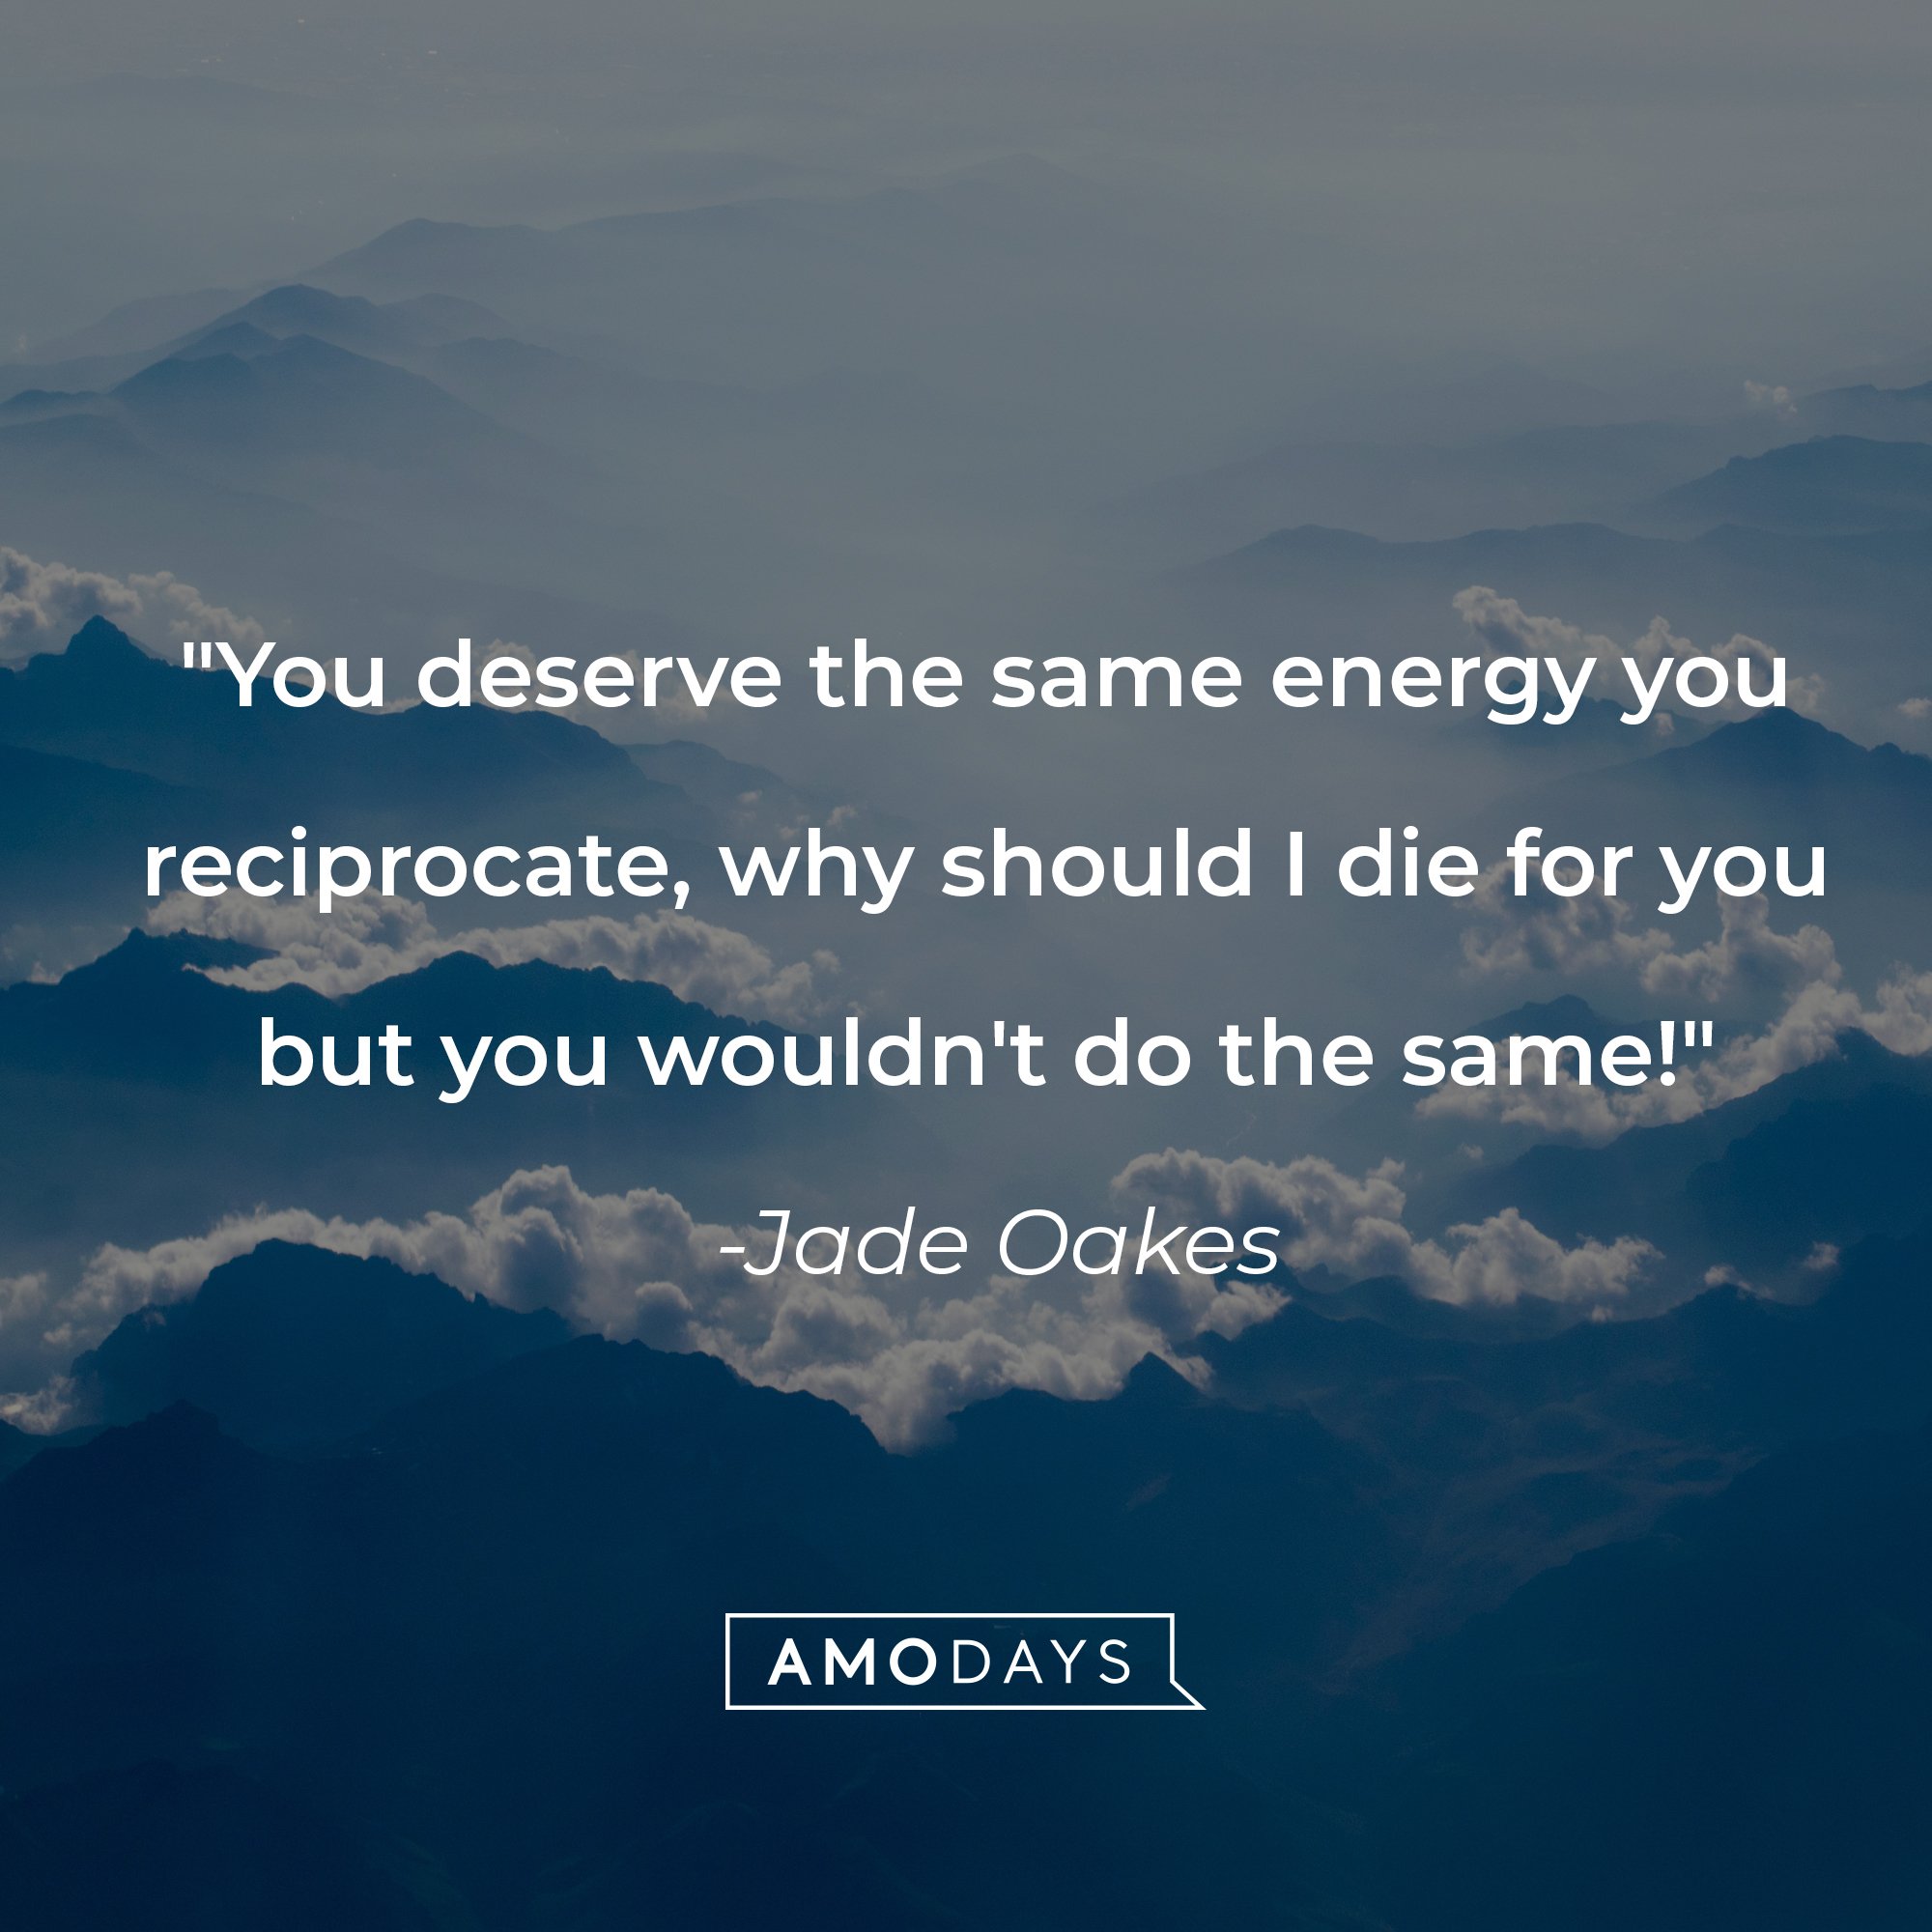 Jade Oakes' quote: "You deserve the same energy you reciprocate, why should I die for you but you wouldn't do the same!" | Image: AmoDays